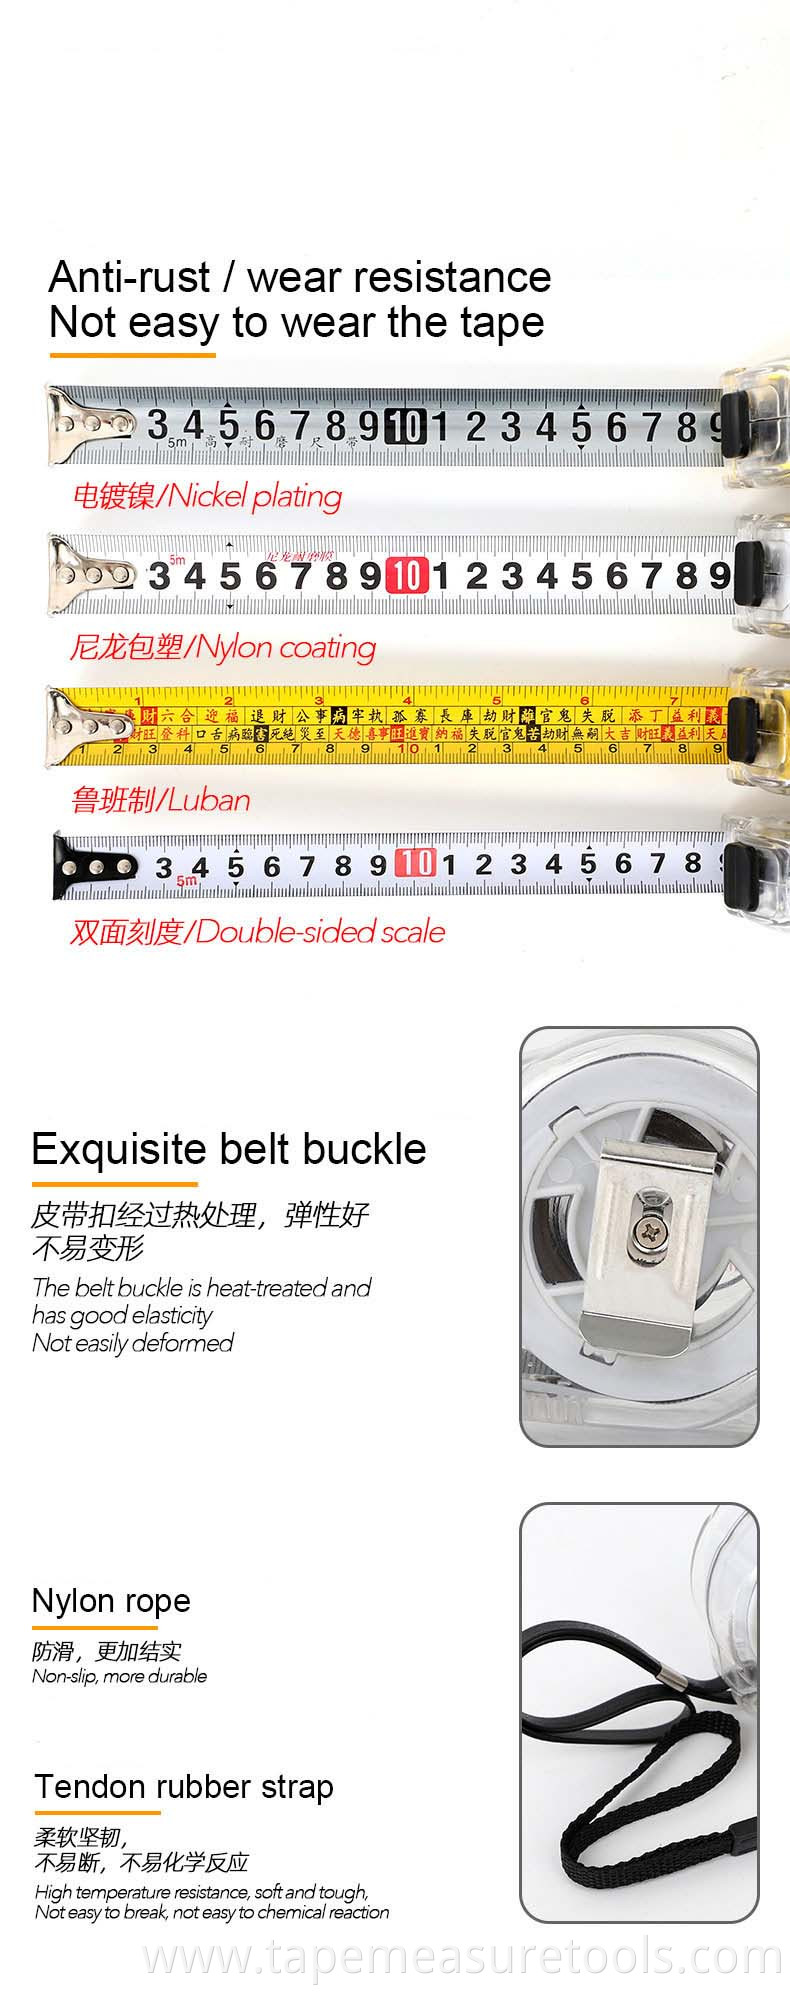 Transparent new ABS steel tape measure, 3m5m7.5m home measuring tape